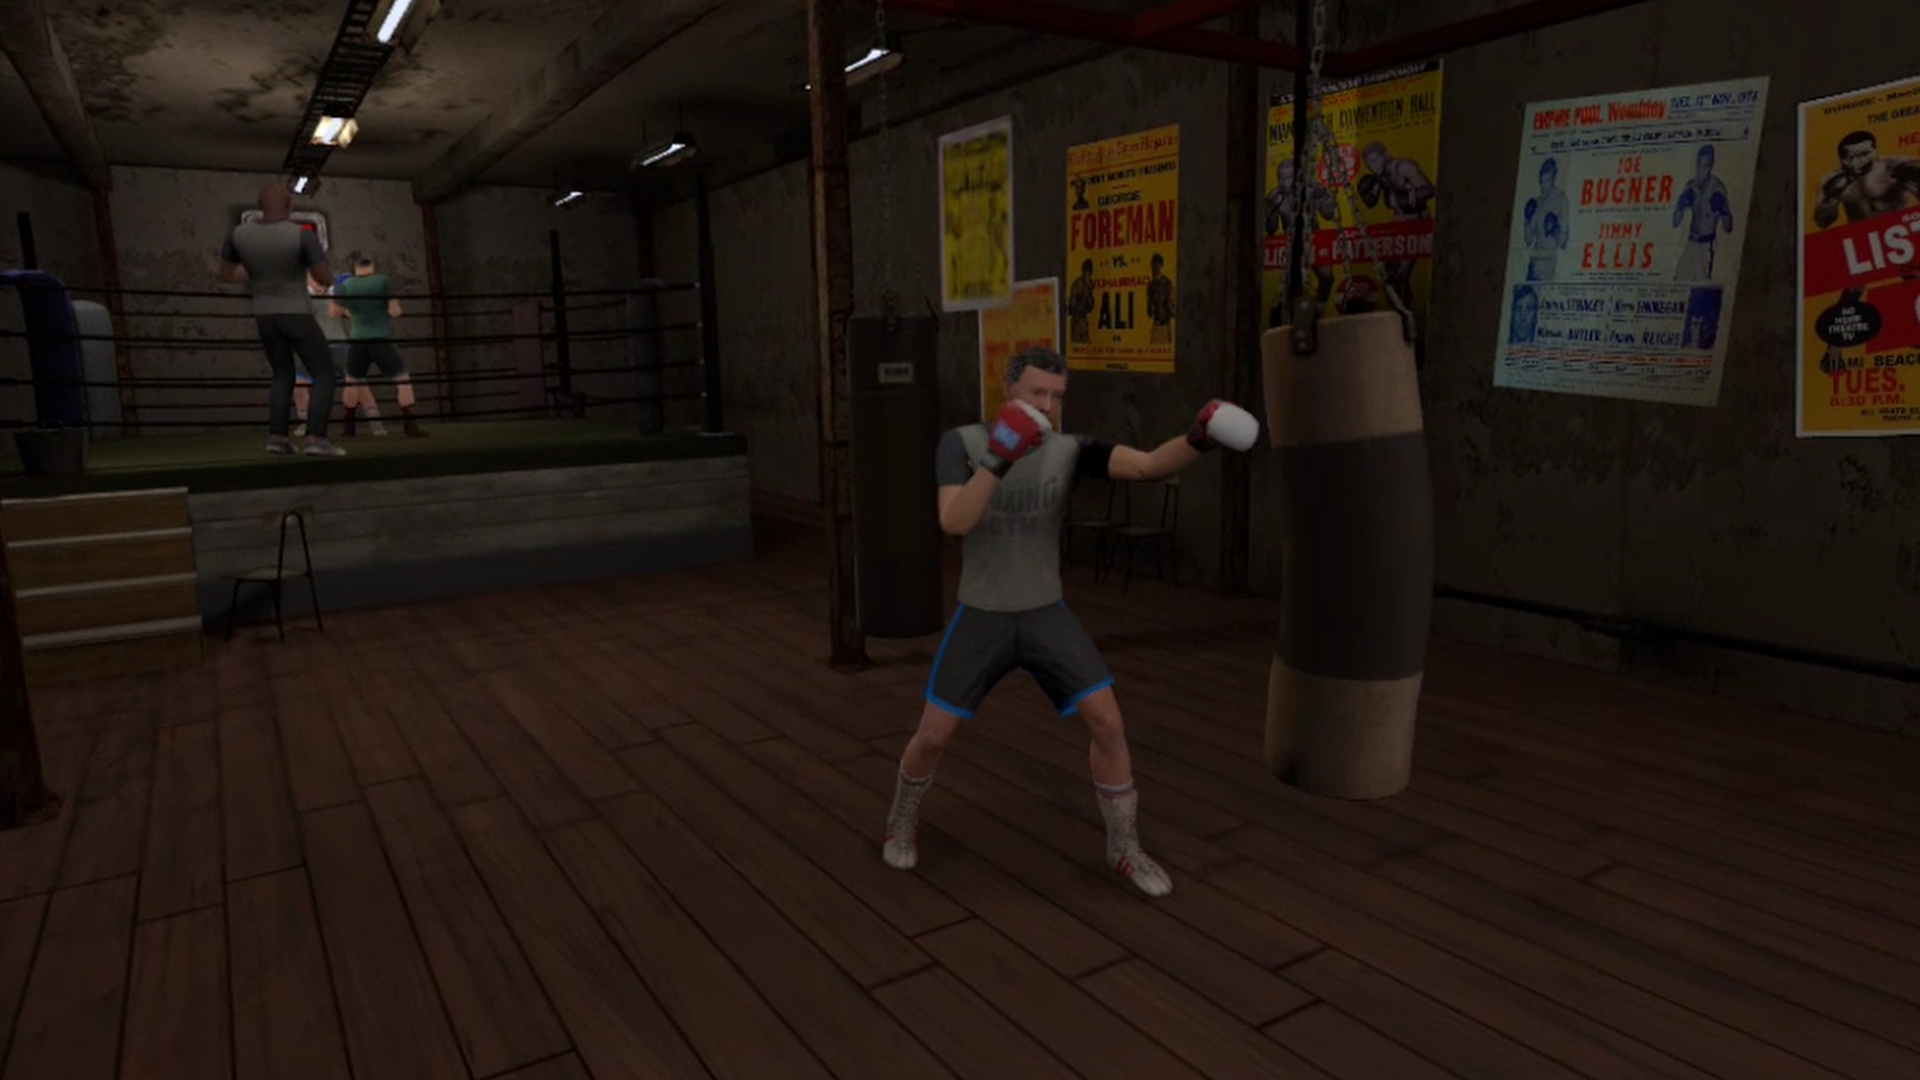 image showing boxers working out in the gym.